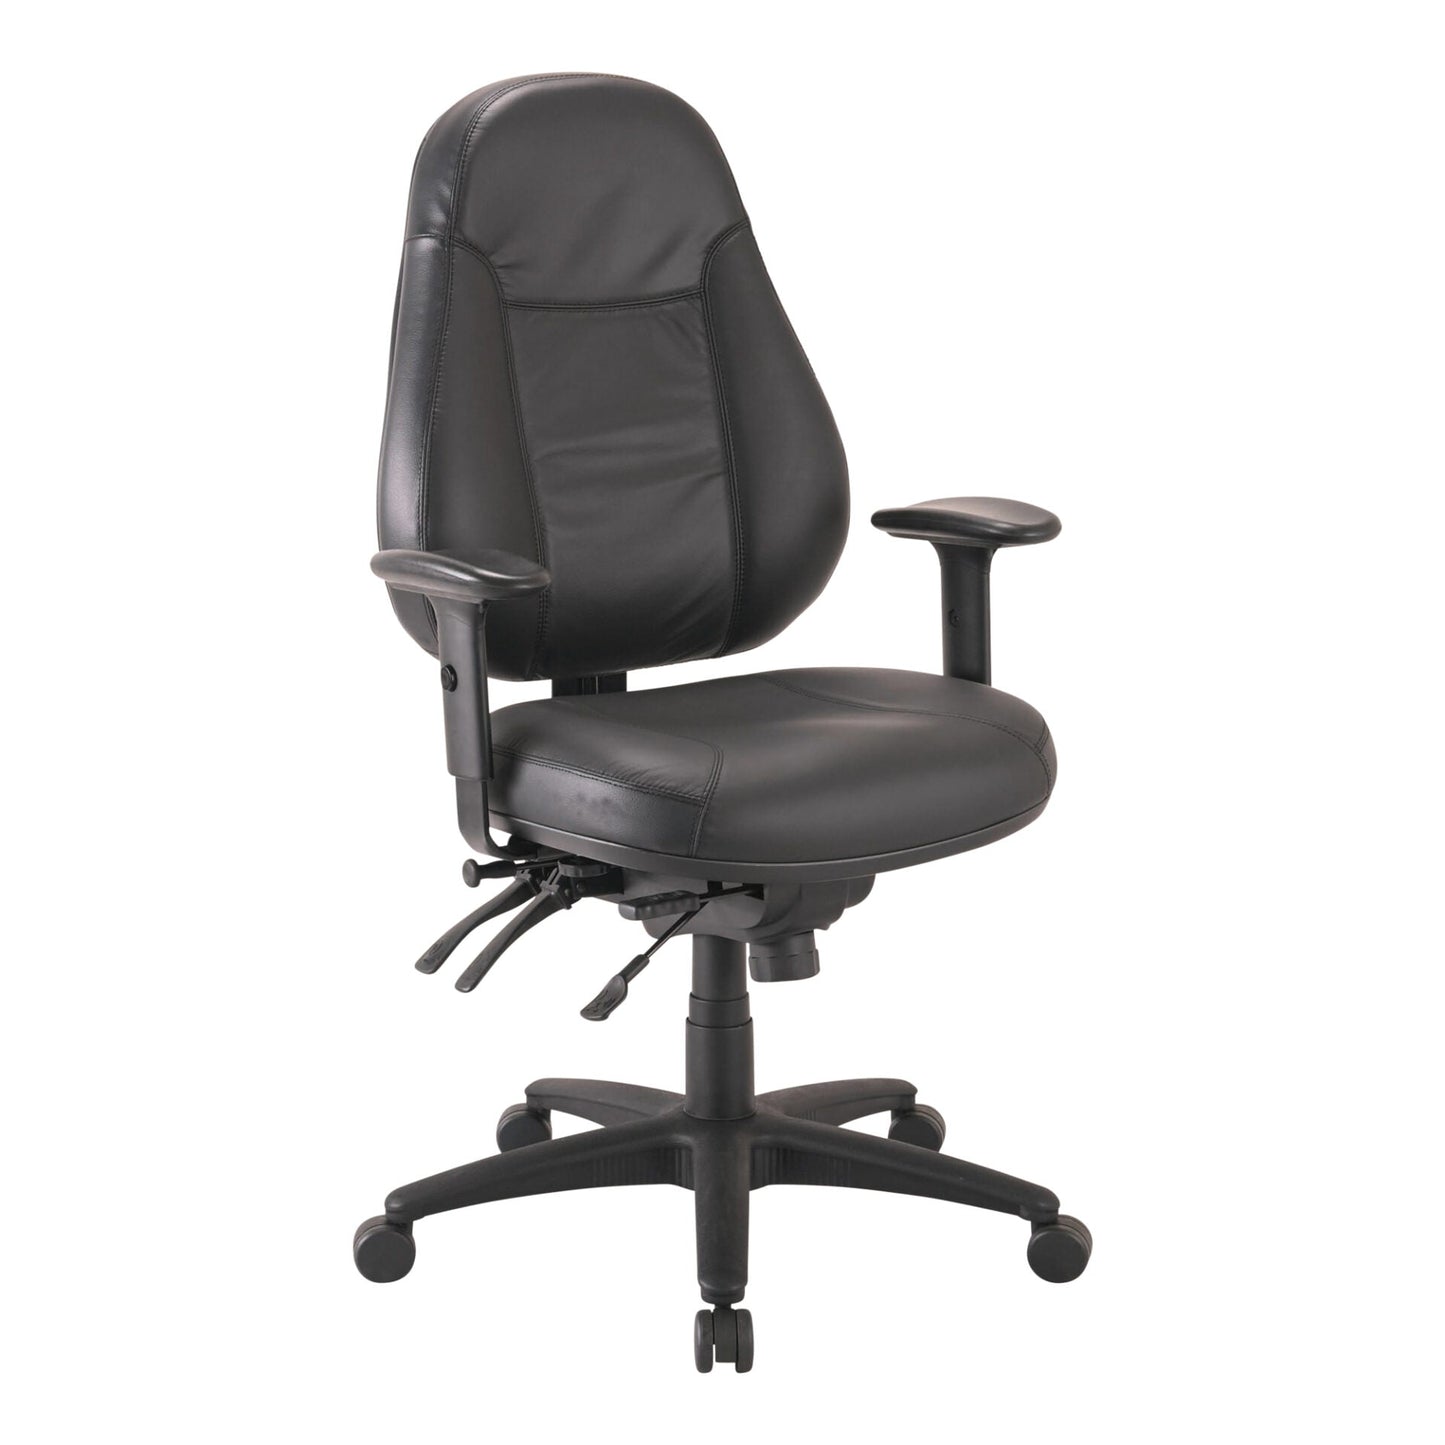 Persona Chair - 24/7 Leather